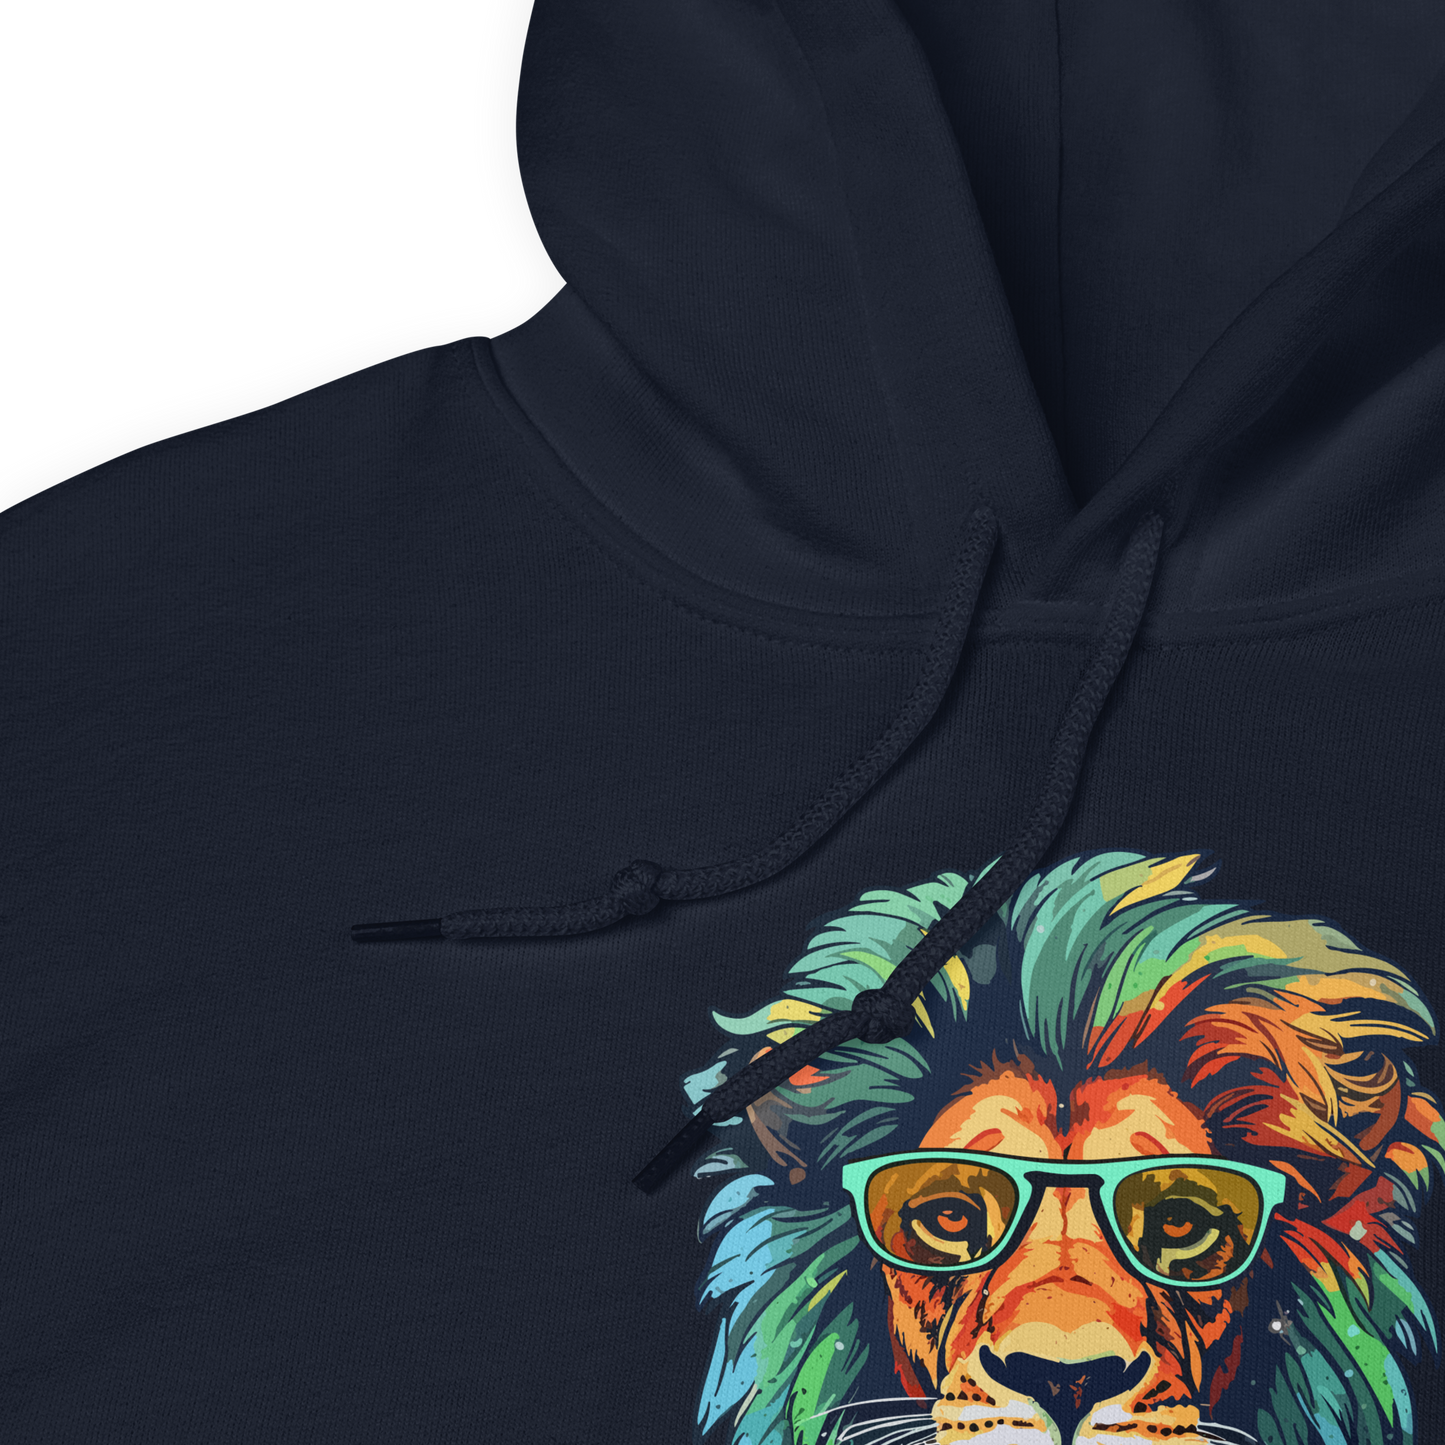 Front details of a Navy Lion Hoodie featuring a fierce Rebel Lion graphic on the chest - Funny Graphic Lion Hoodies - Boozy Fox